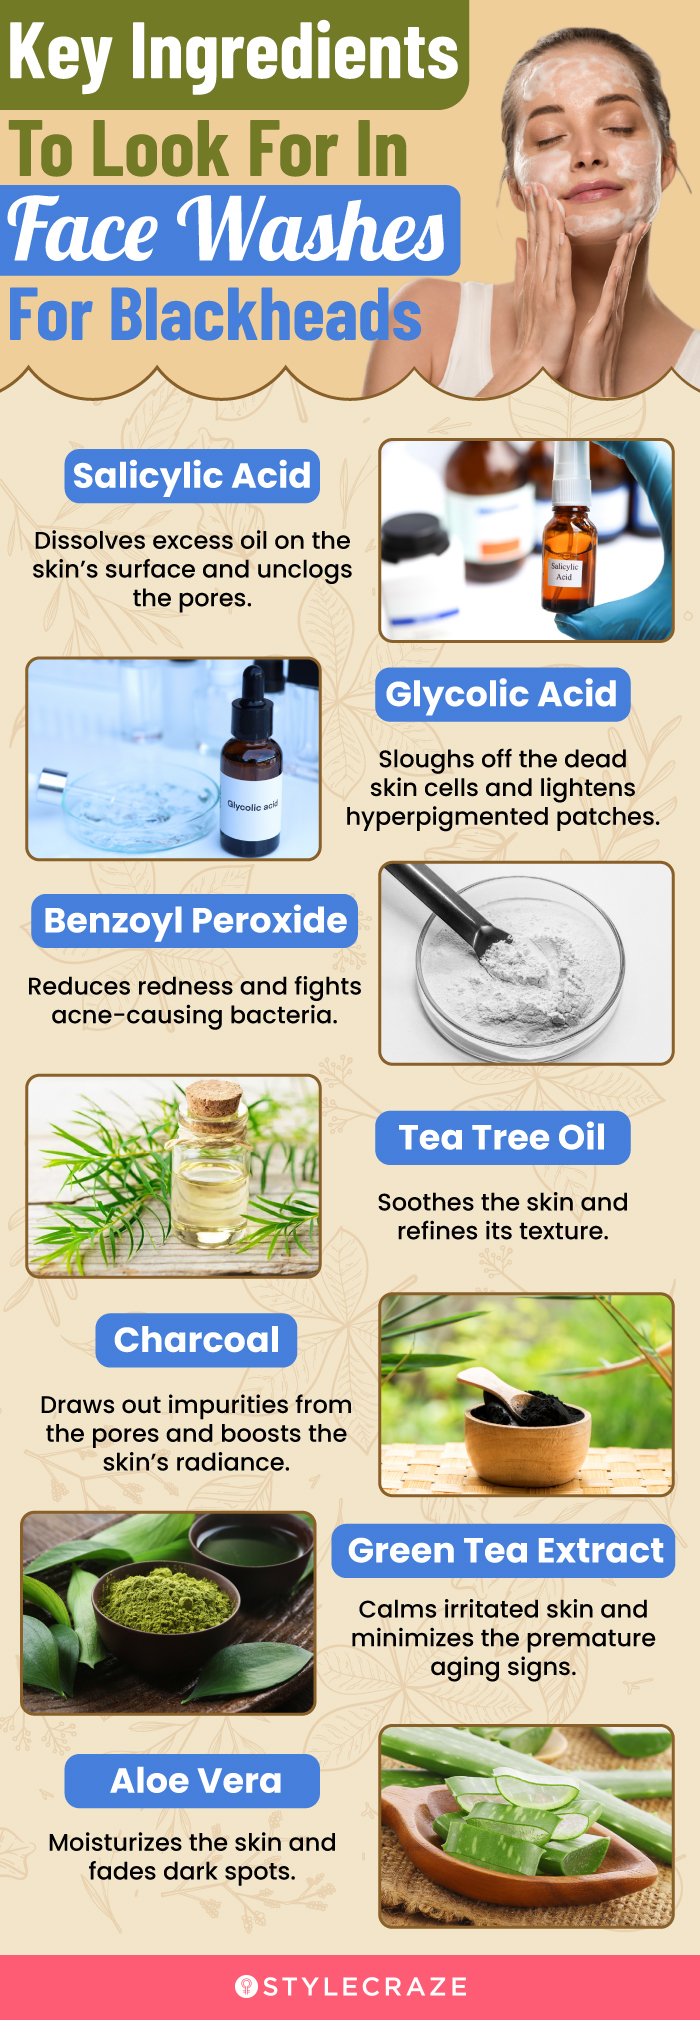 Key Ingredients To Look For In Face Washes For Blackheads (infographic)